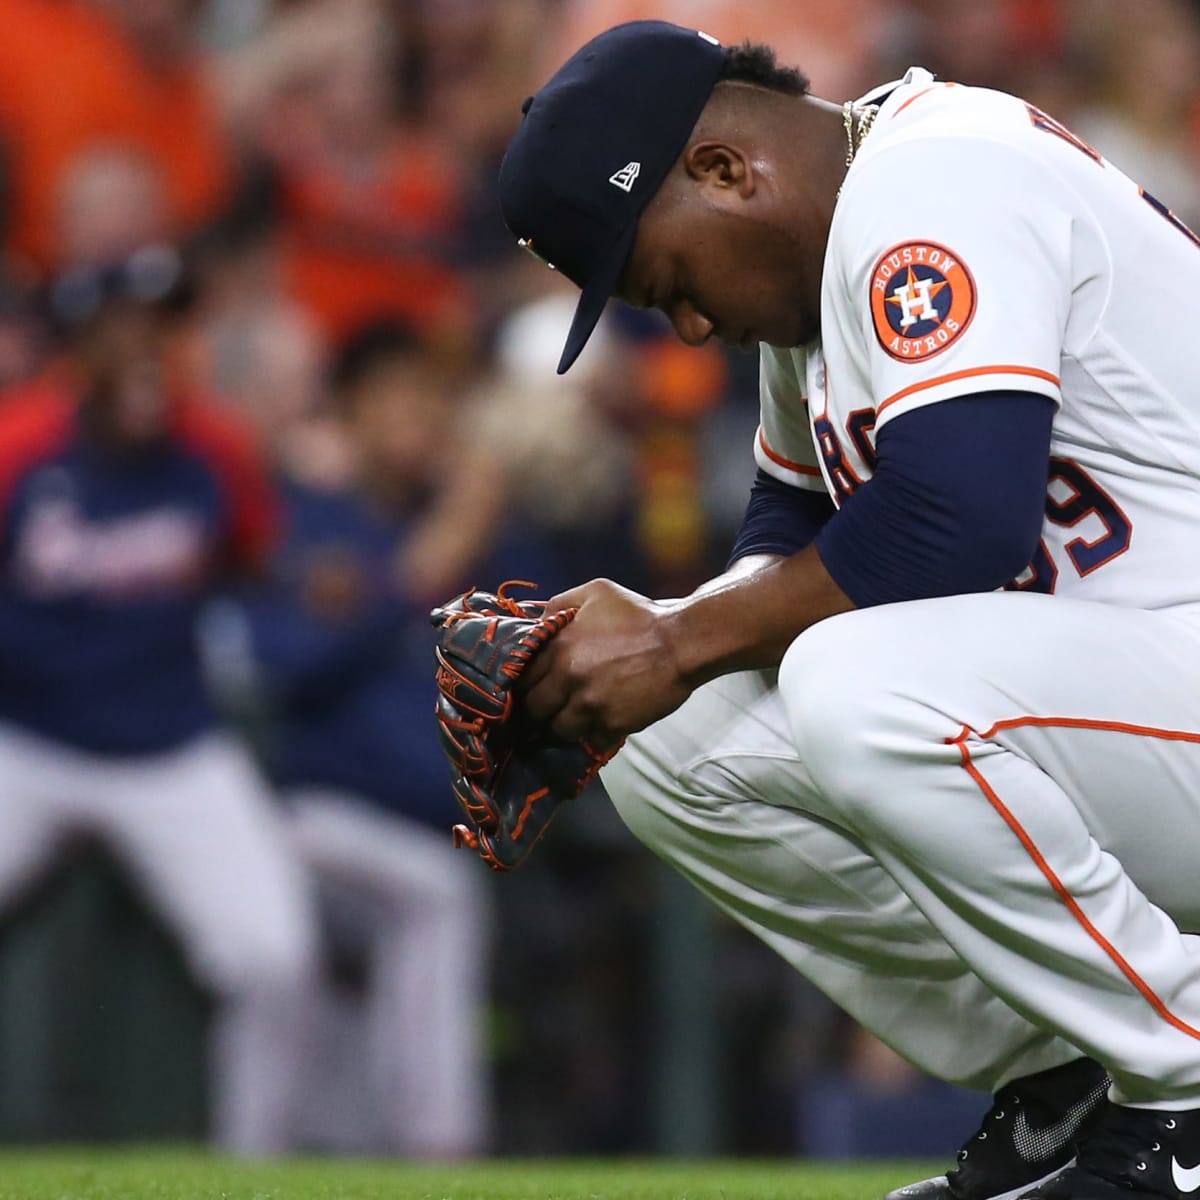 Framber Valdez flummoxed by fly balls in Game 1 loss - Sports Illustrated